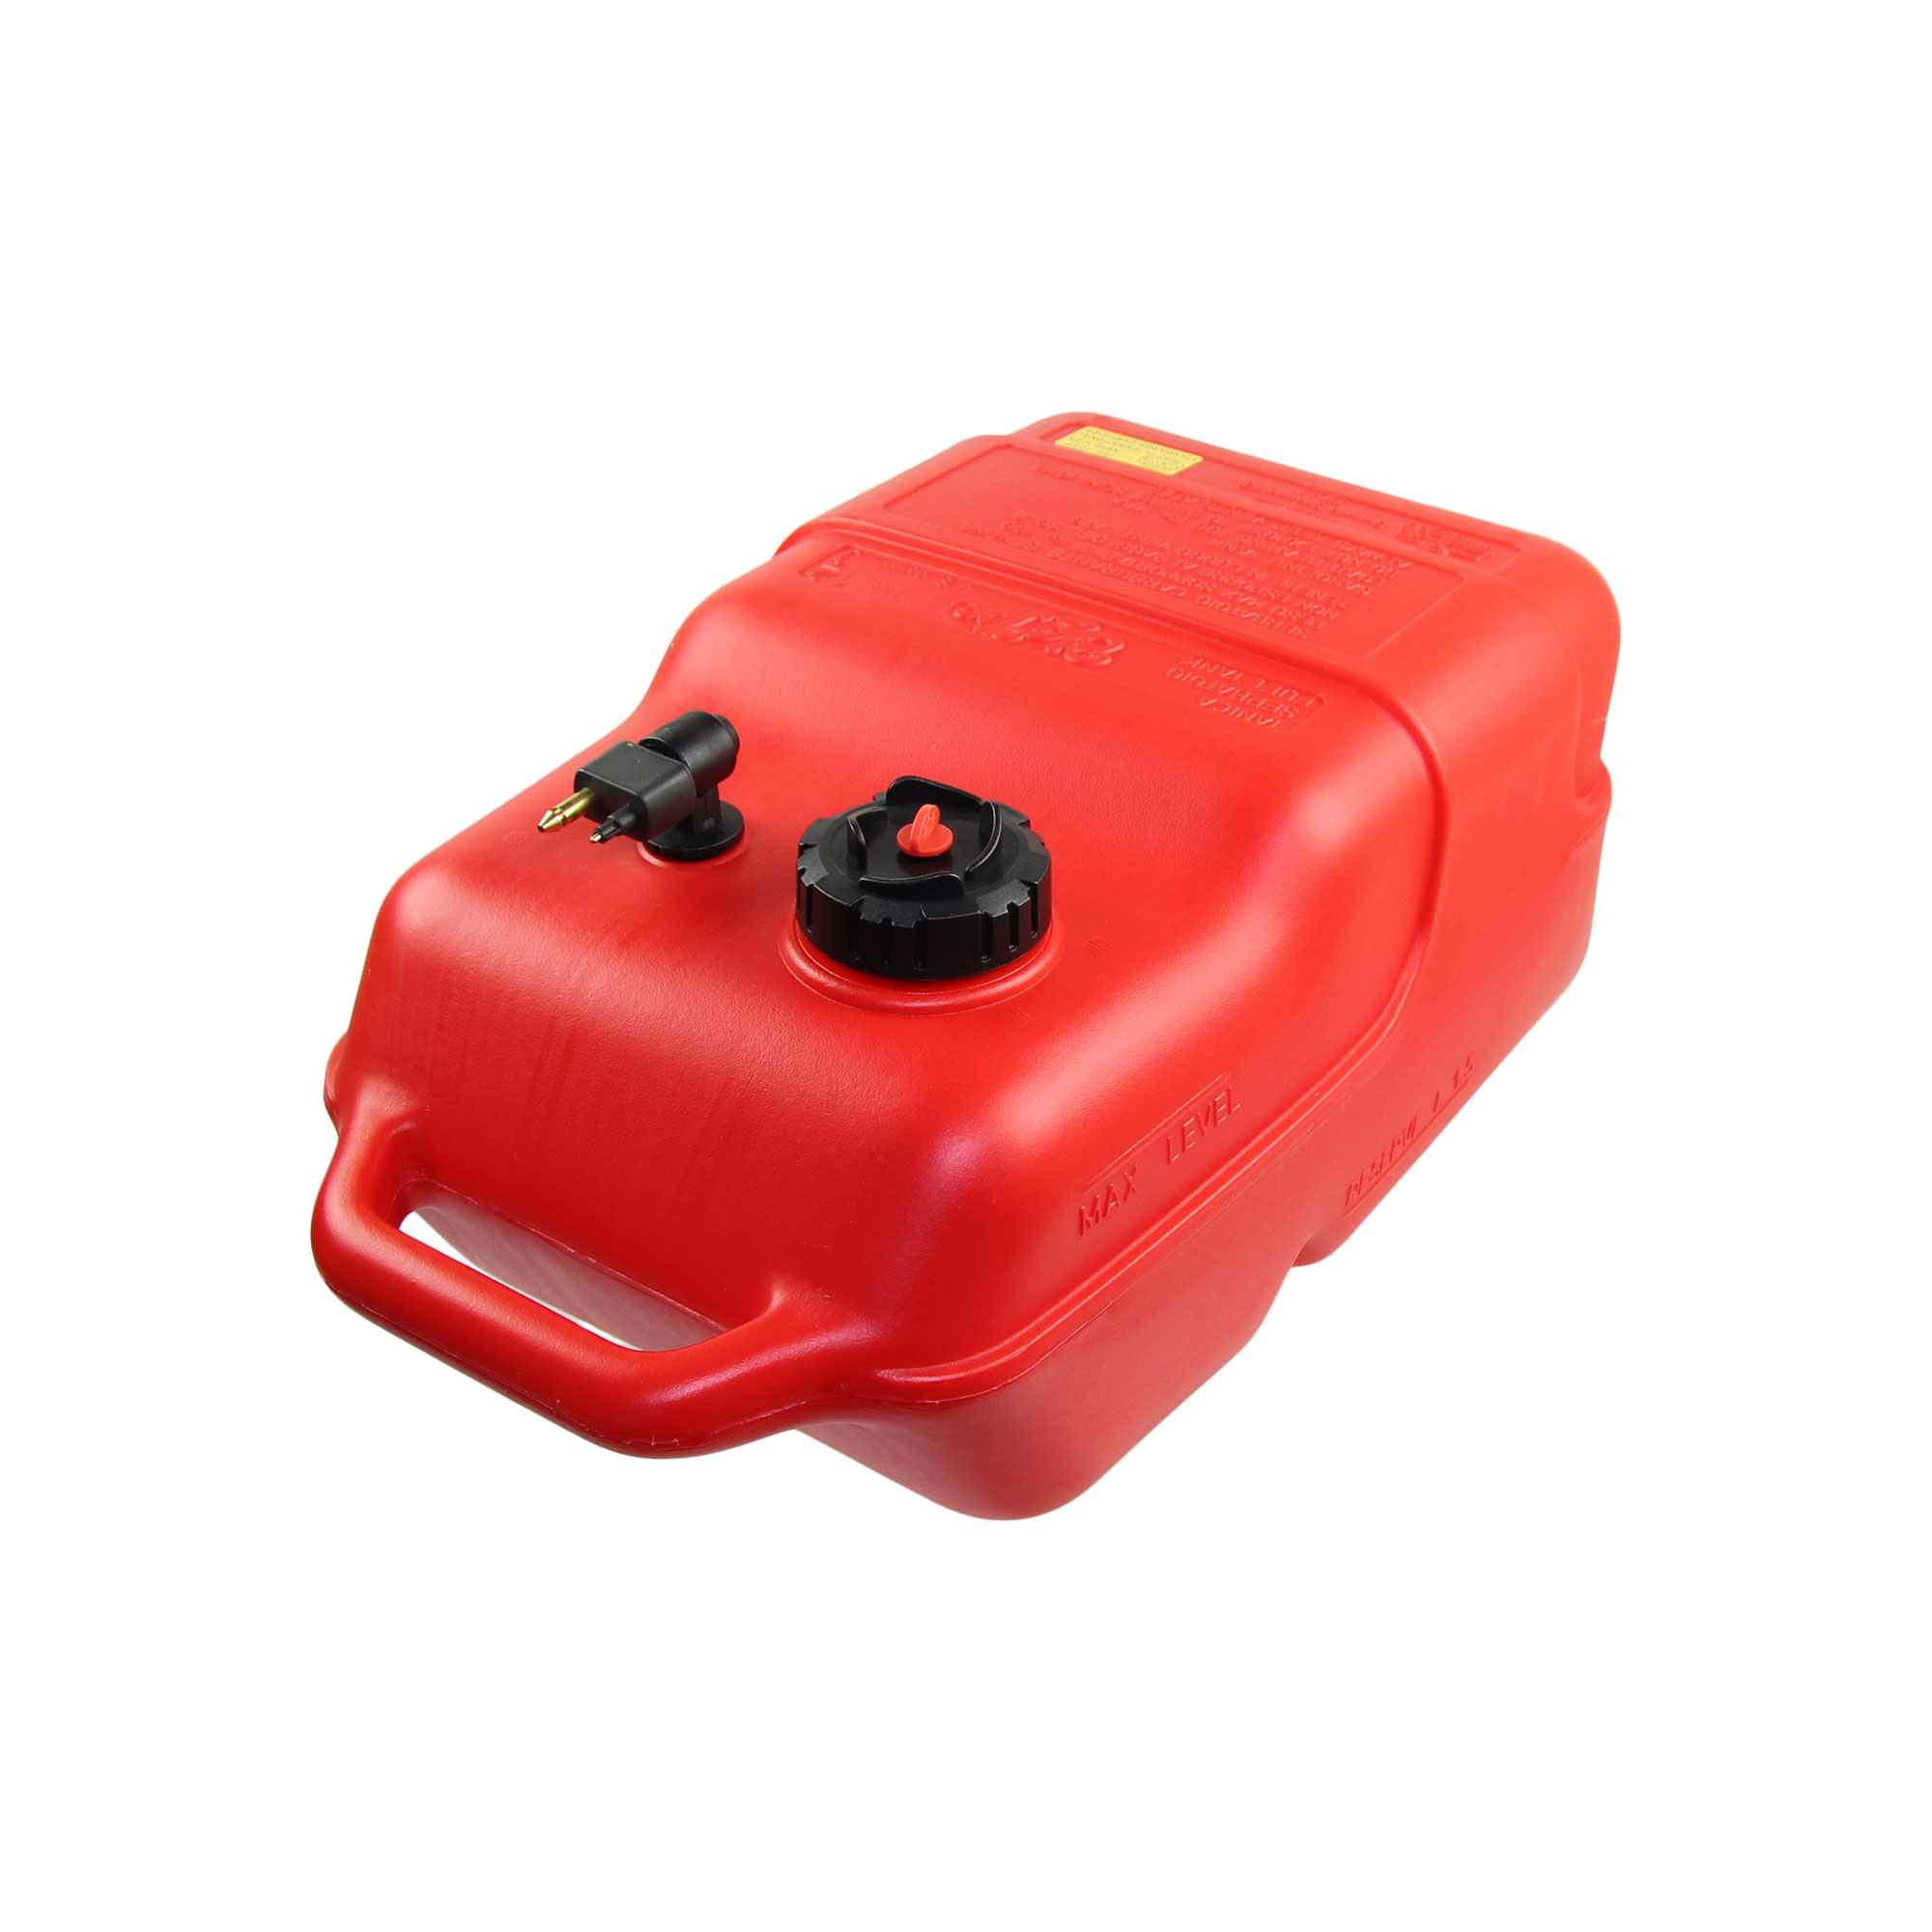 Fuel tank red with Johnson & Evinrude connection